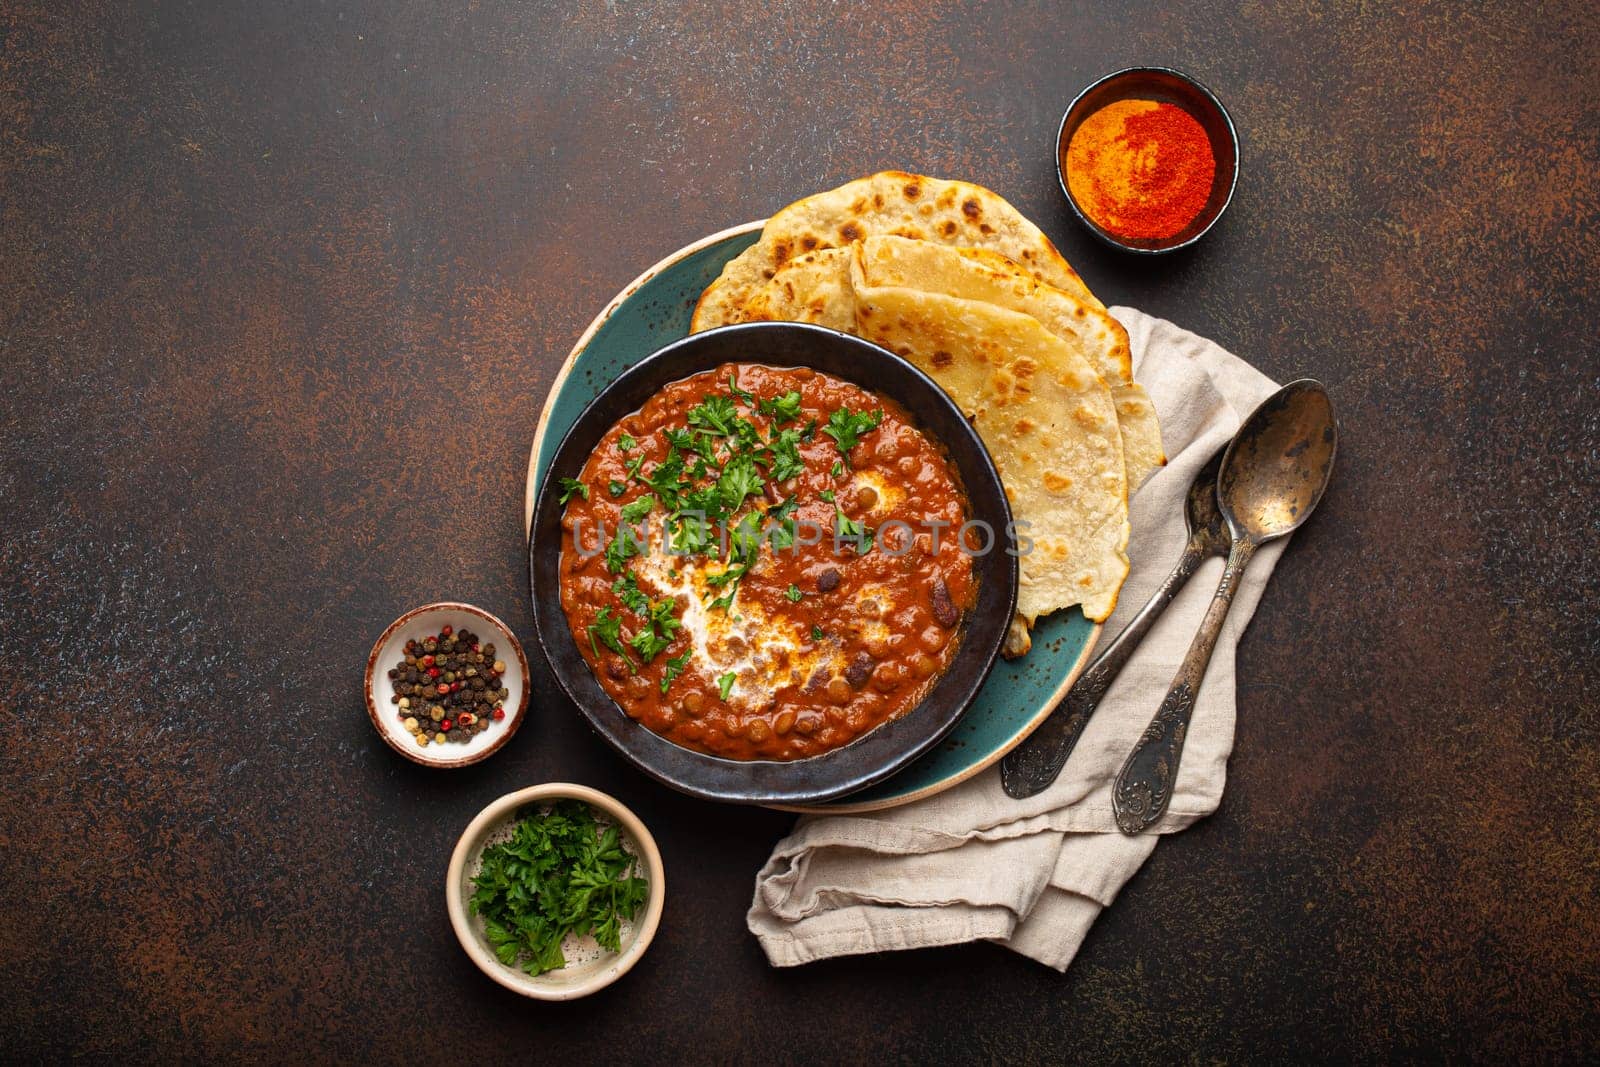 Traditional Indian Punjabi dish Dal makhani with lentils and beans in black bowl served with naan flat bread, fresh cilantro and two spoons on brown concrete rustic table top view. Space for text.